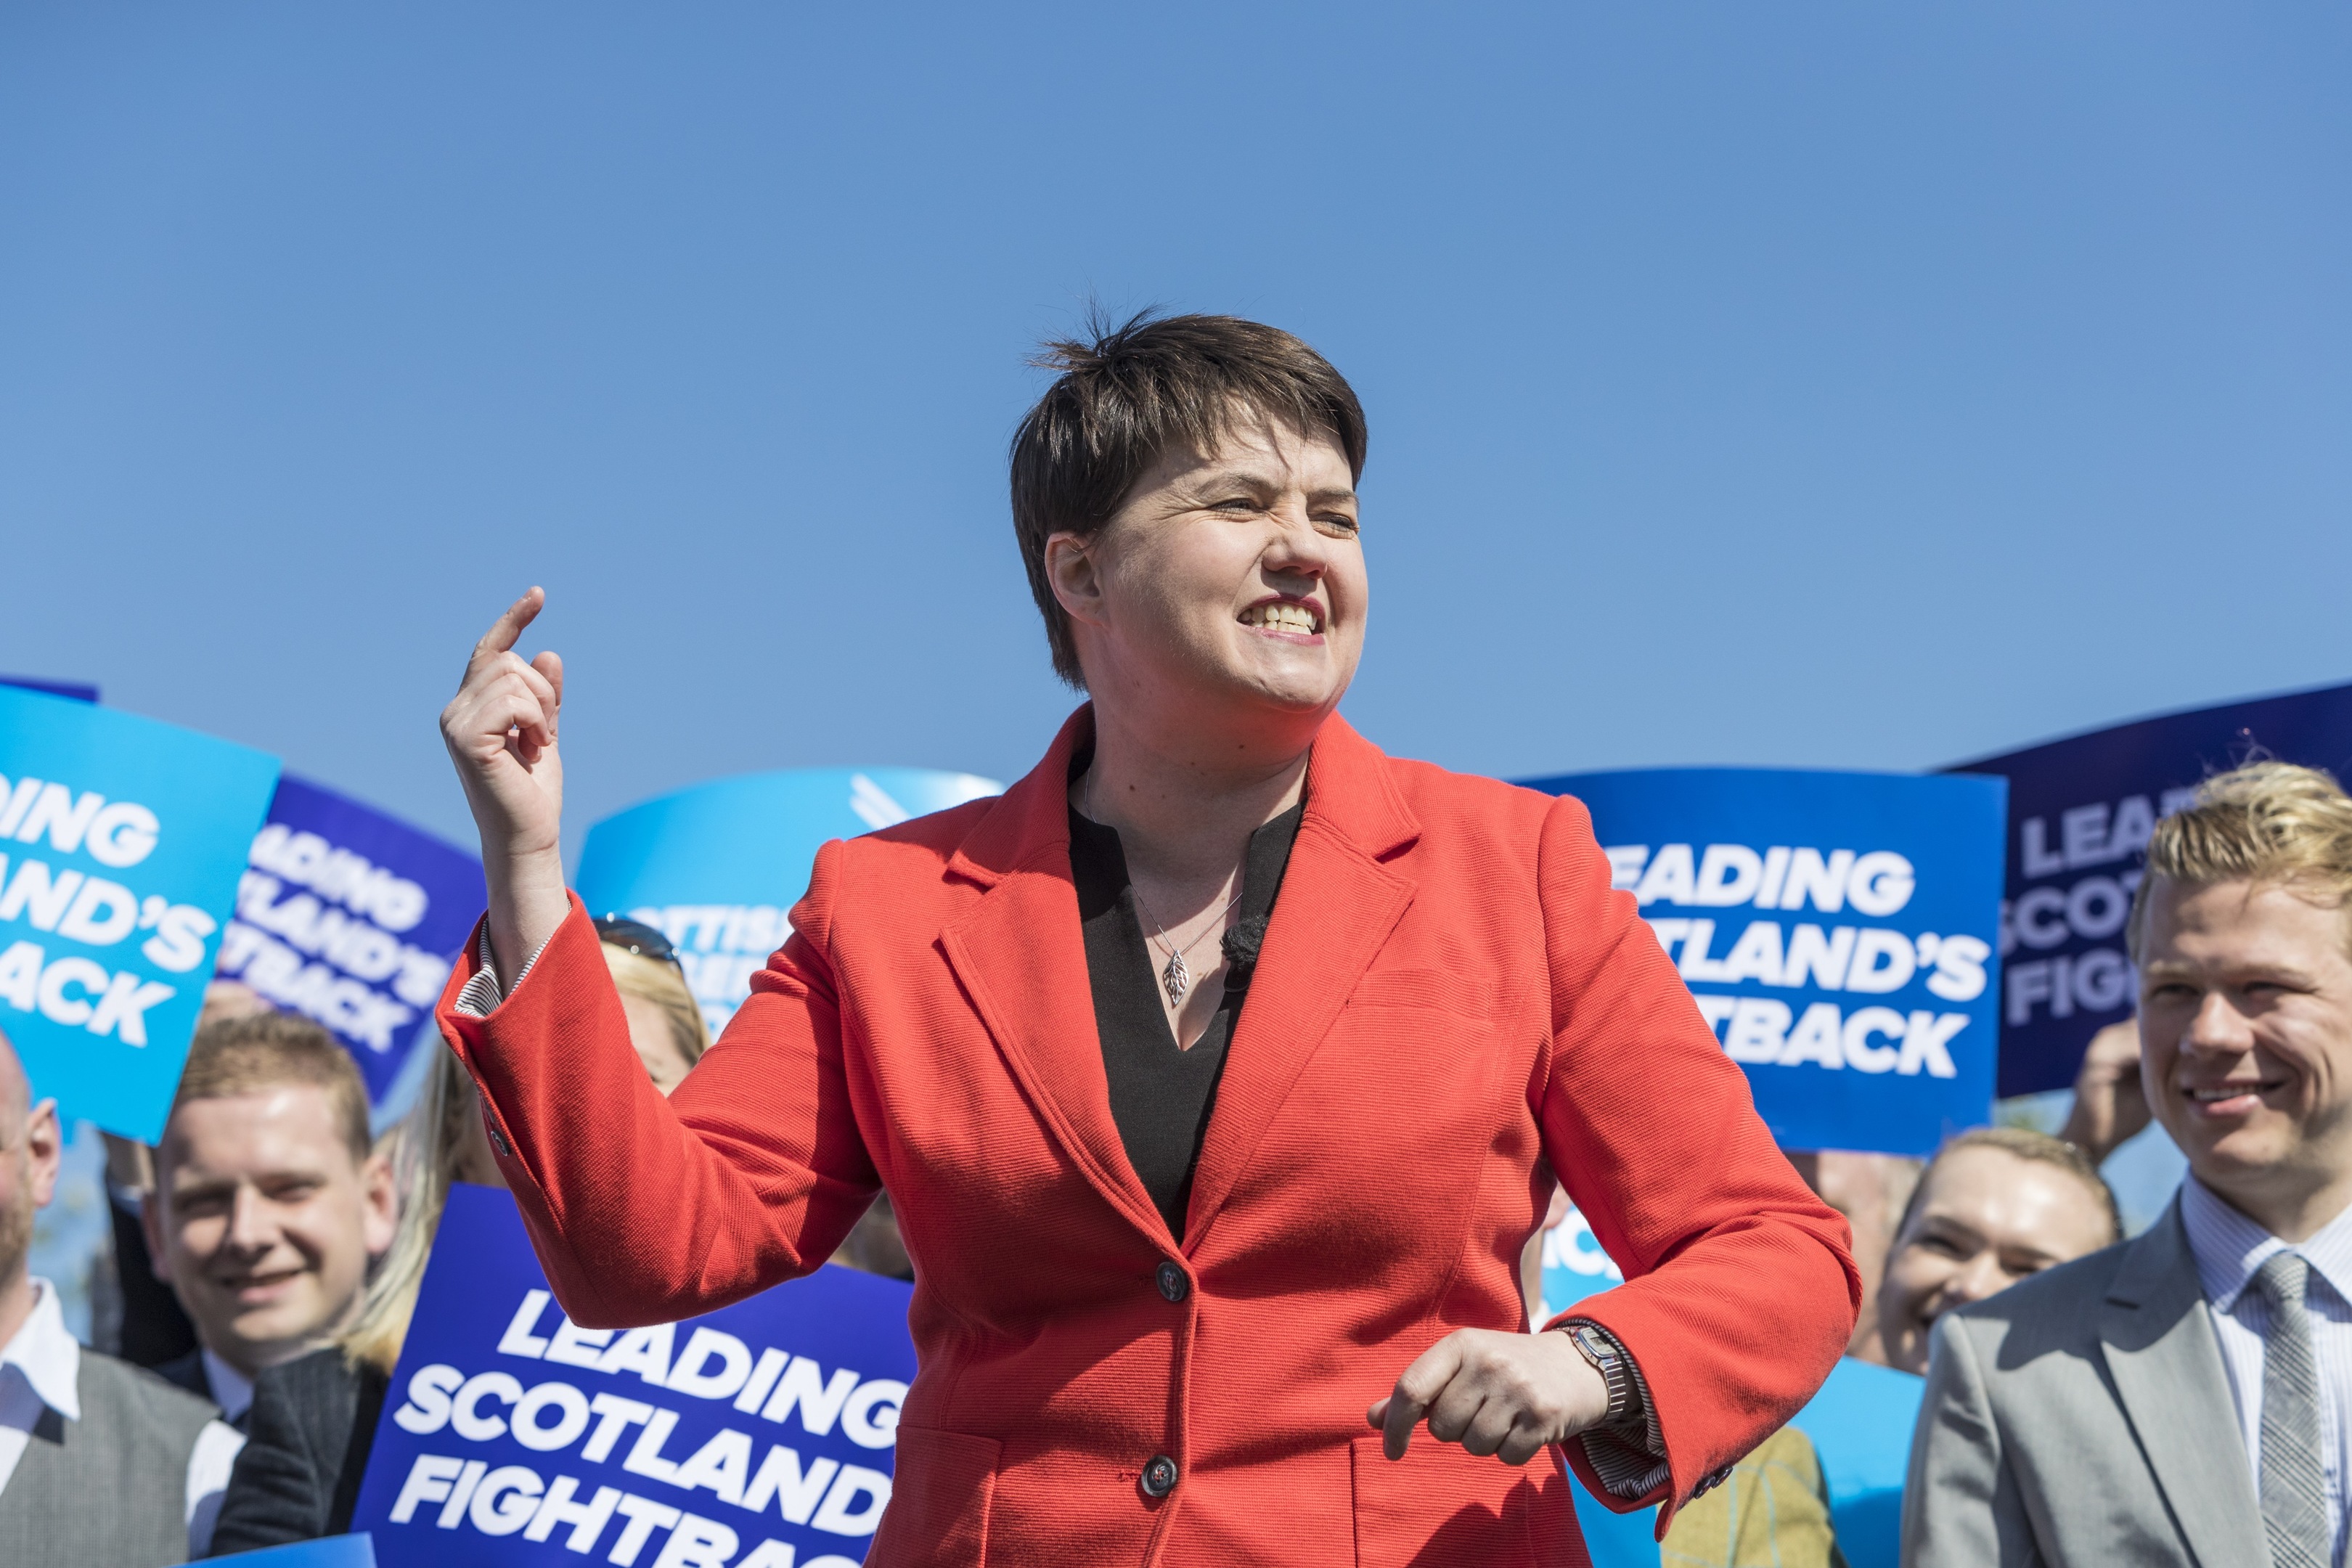 Ruth Davidson launches election campaign. The Scottish Conservative leader gives a speech to activists to Edinburgh's Glasshouse Hotel